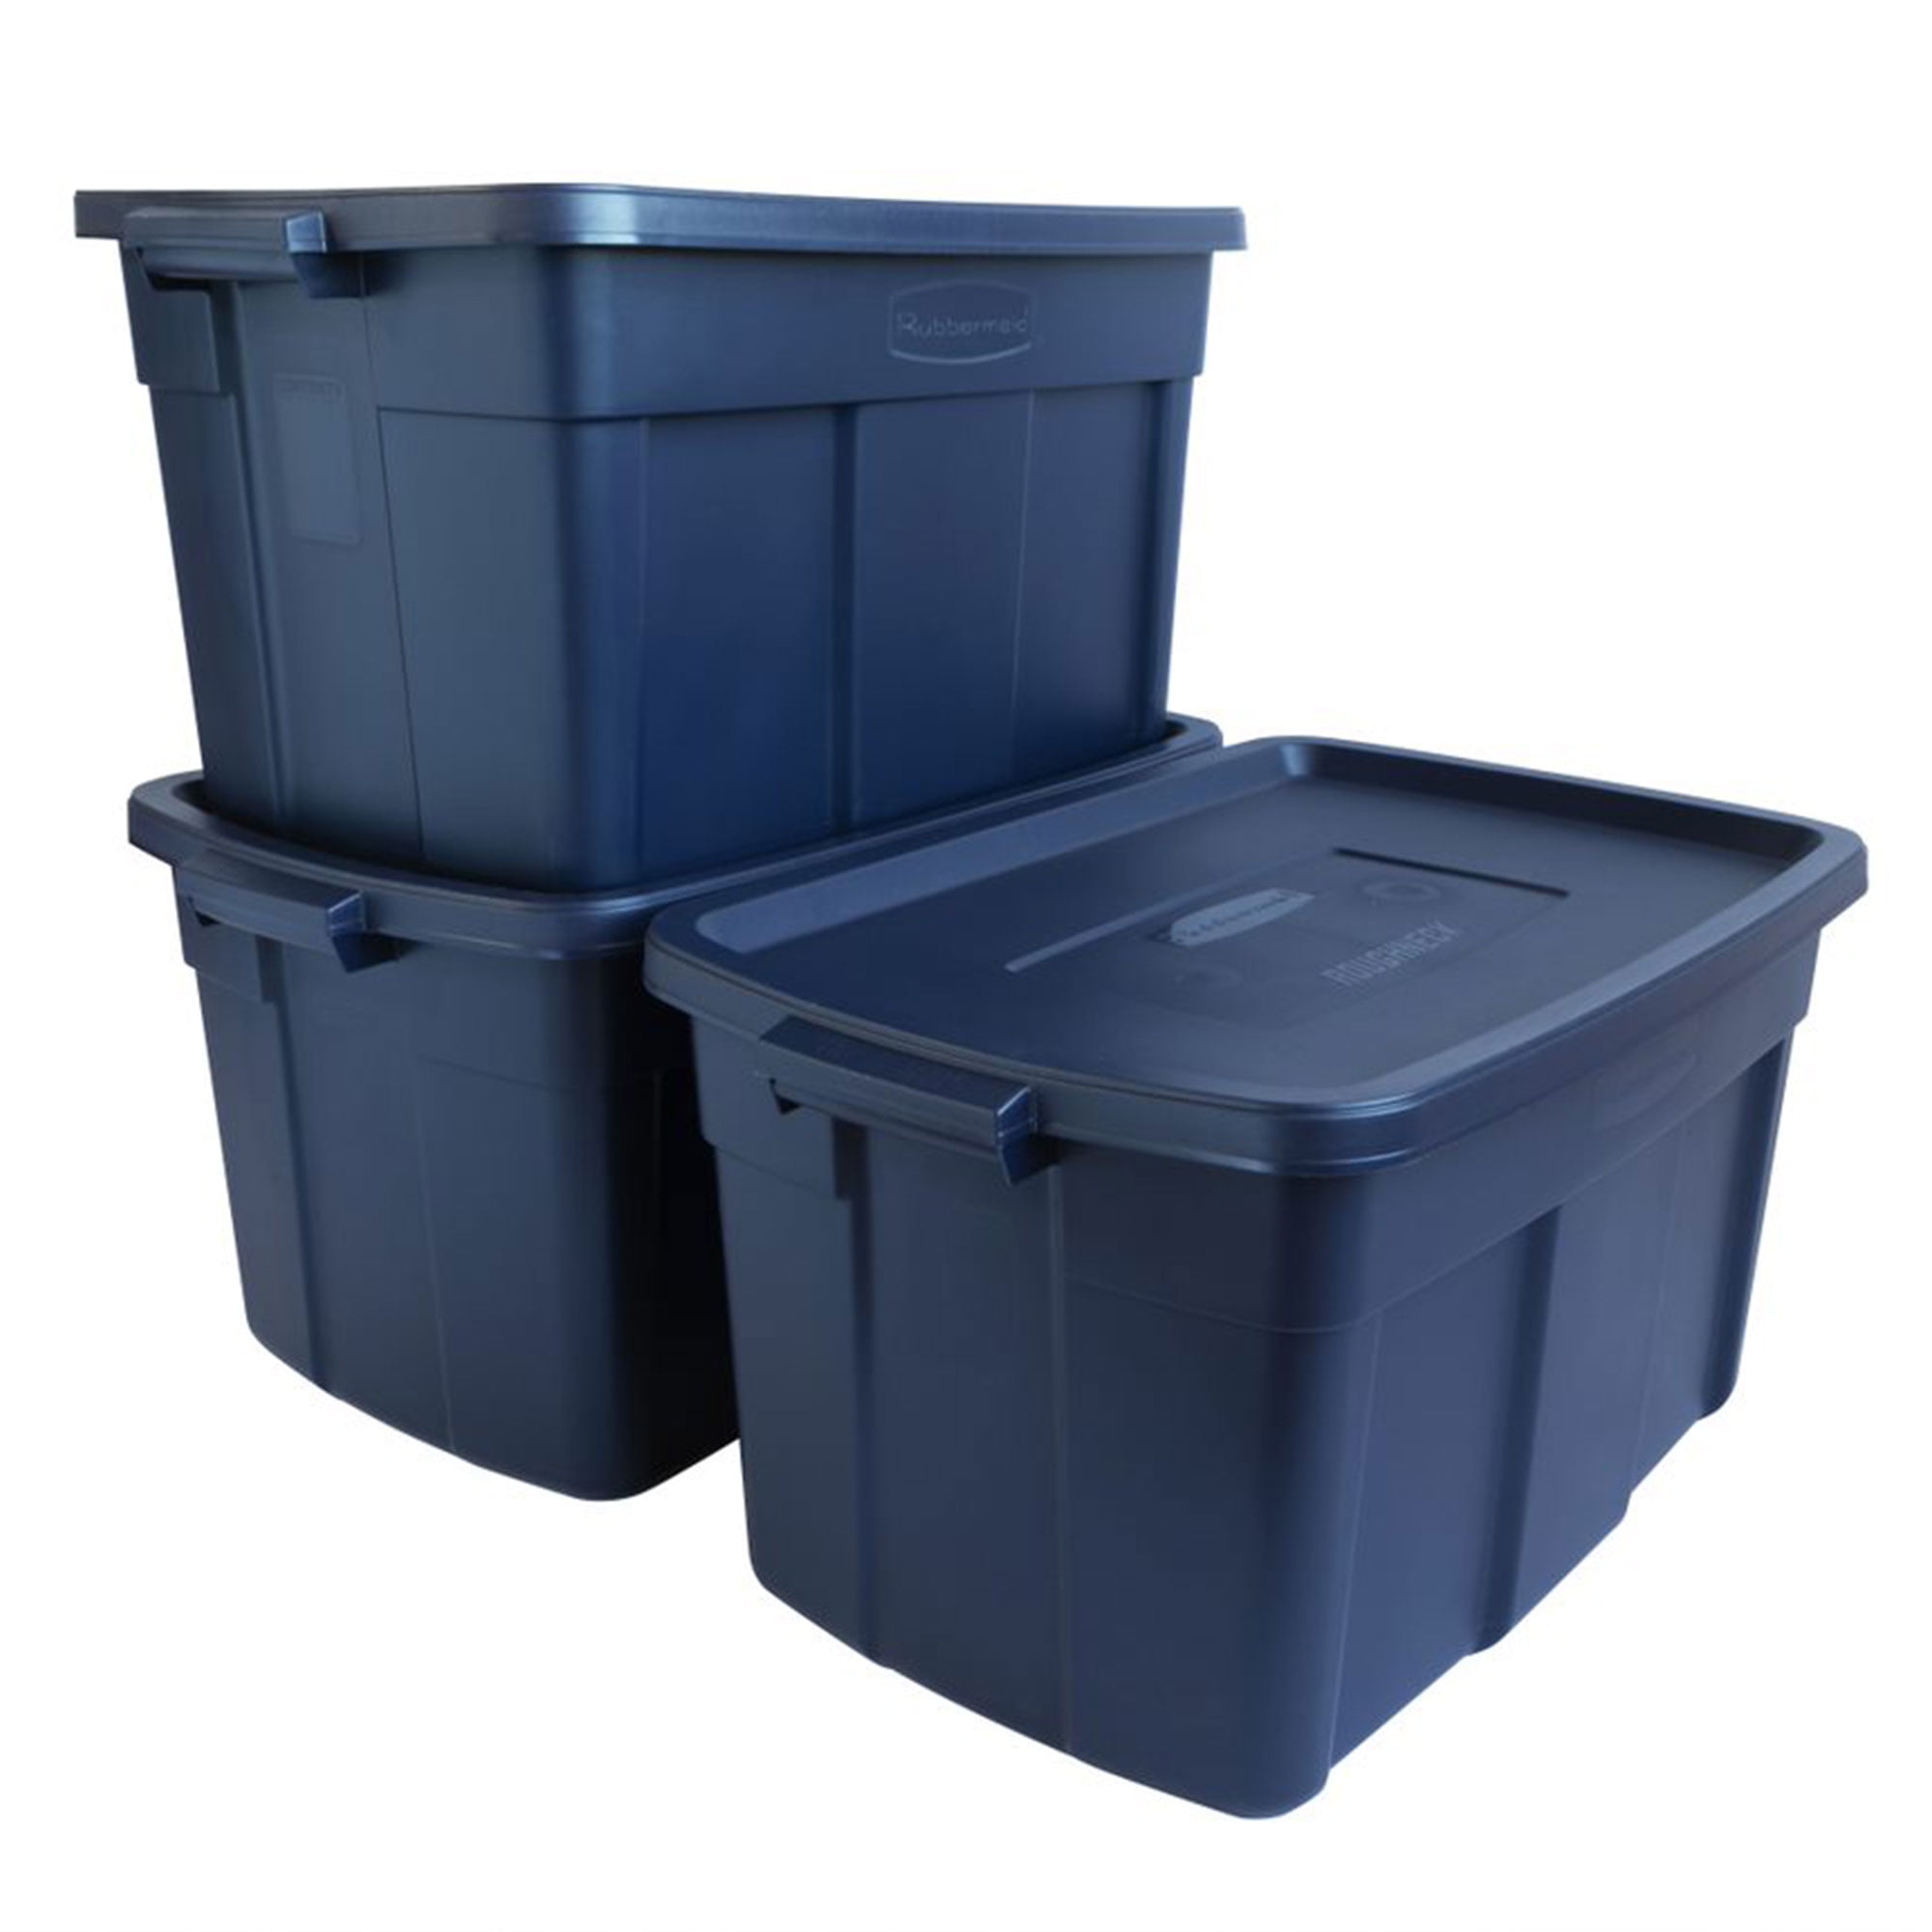 Rubbermaid Roughneck 3 Gallon Rugged Plastic Reusable Stackable Home Storage  Totes With Lids, Dark Indigo Metallic (12 Pack) : Target